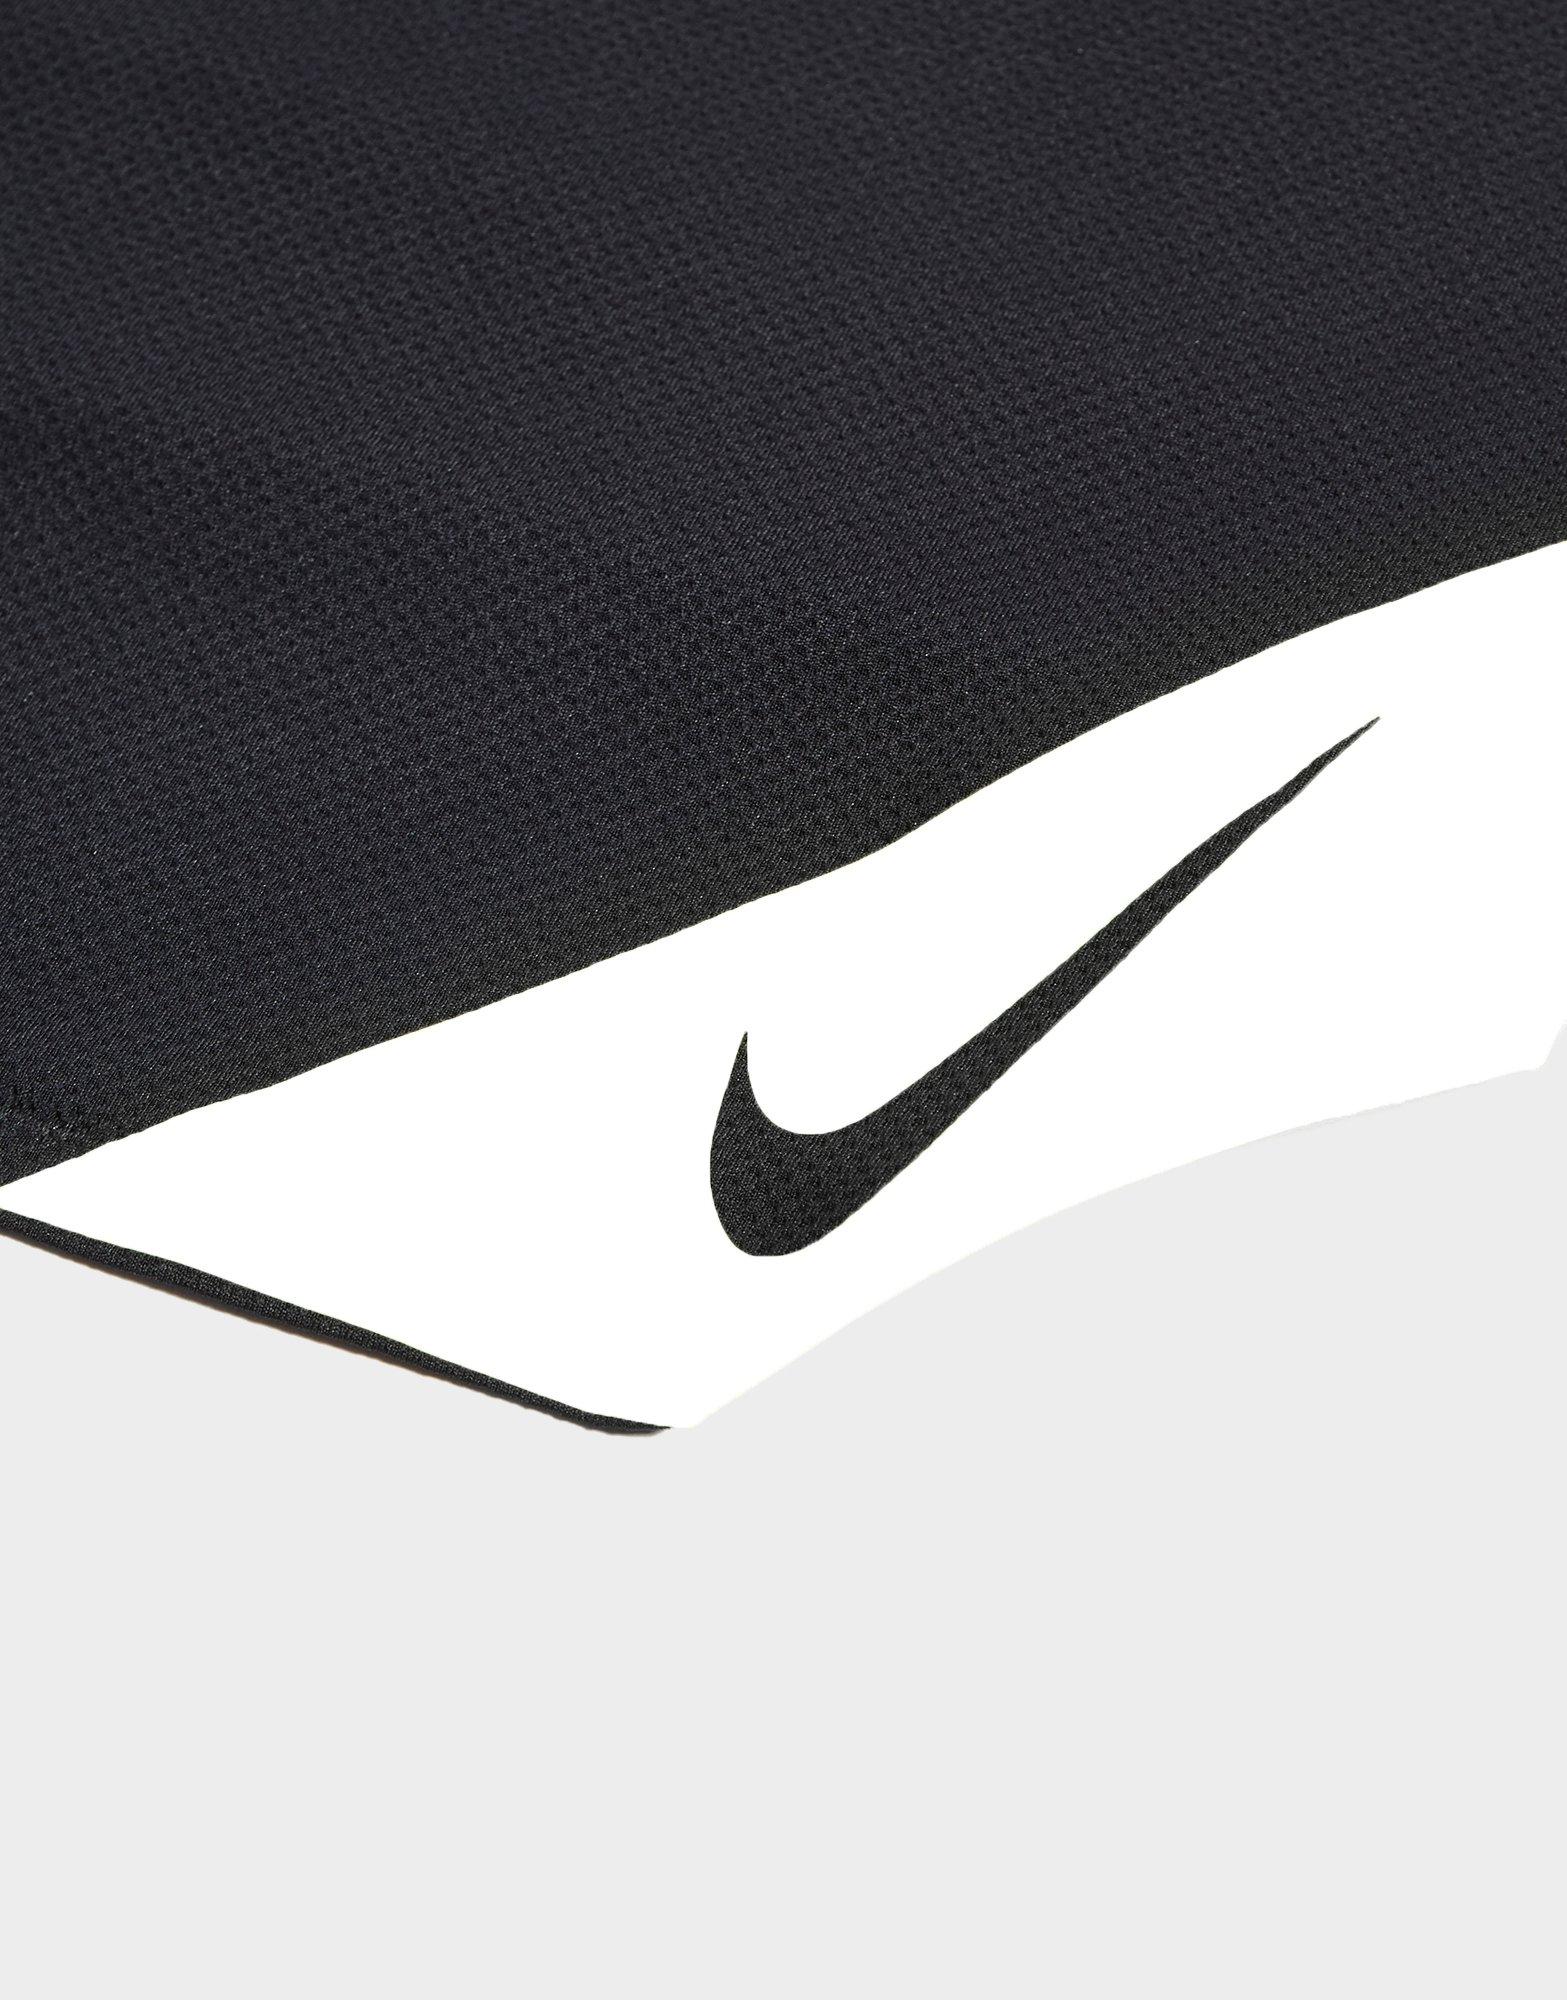 nike cooling towel review